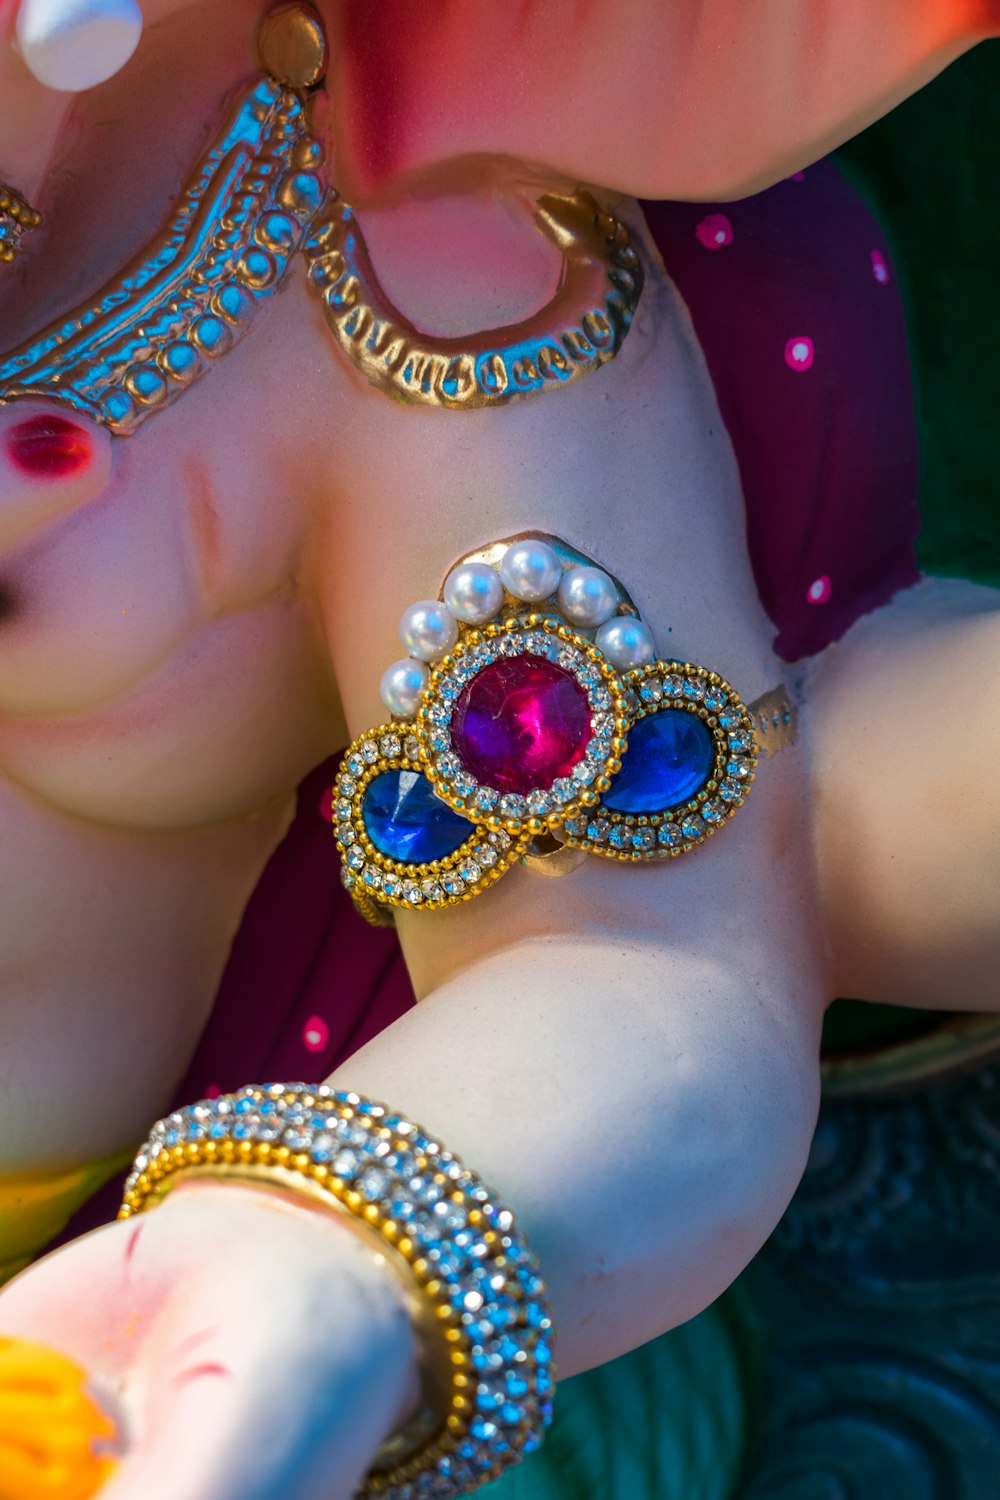 a close up of a statue of a woman wearing jewelry